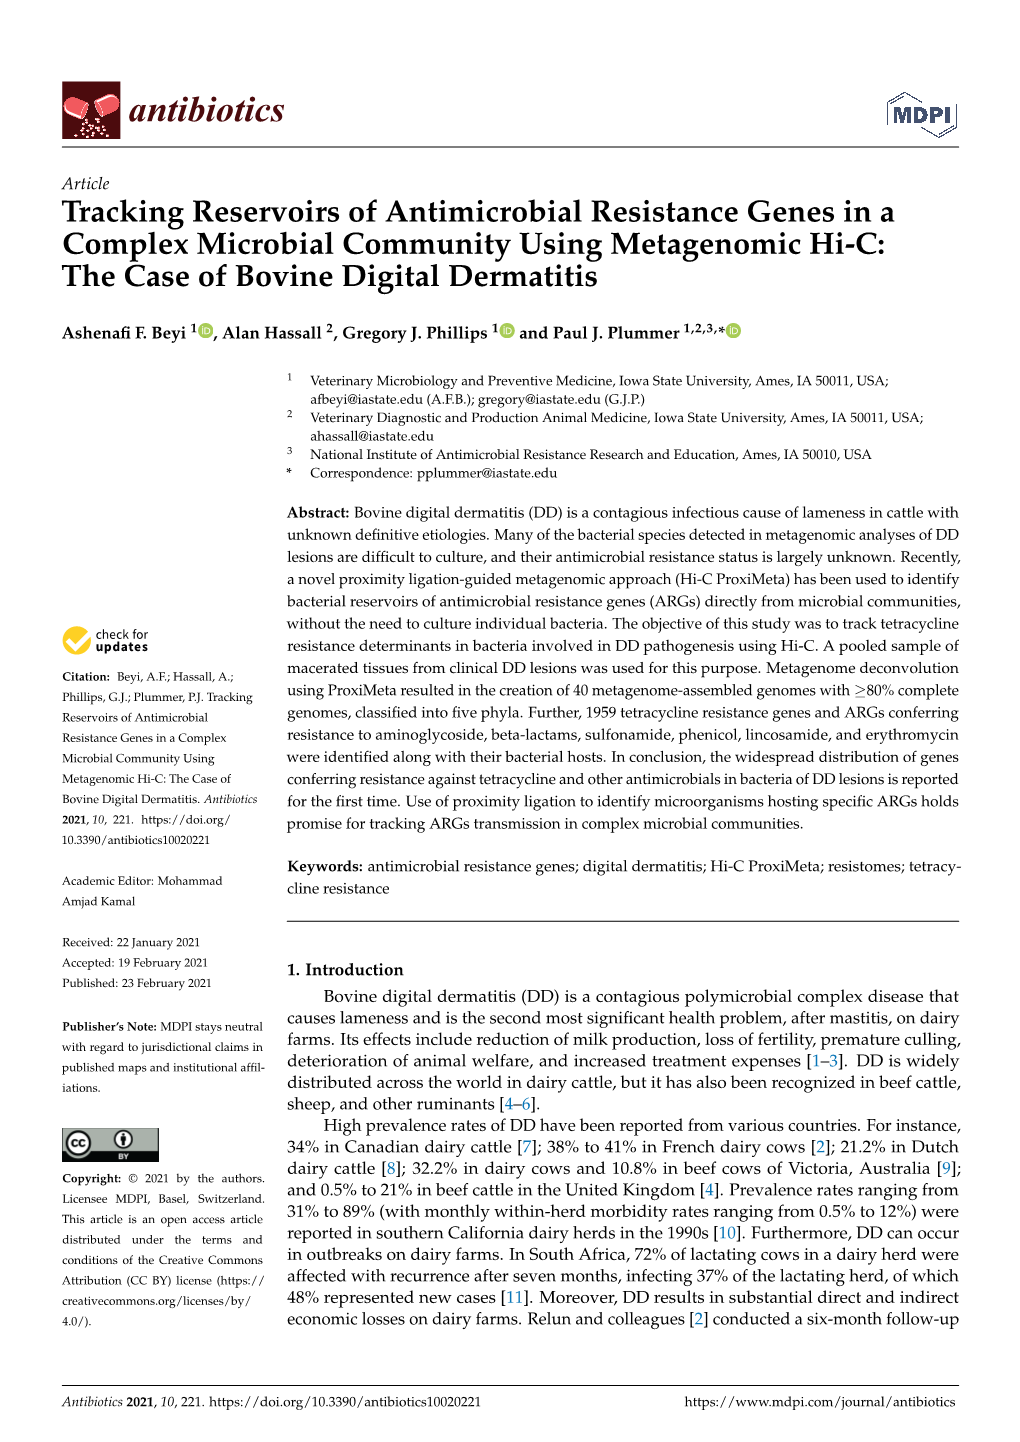 Tracking Reservoirs of Antimicrobial Resistance Genes in a Complex Microbial Community Using Metagenomic Hi-C: the Case of Bovine Digital Dermatitis